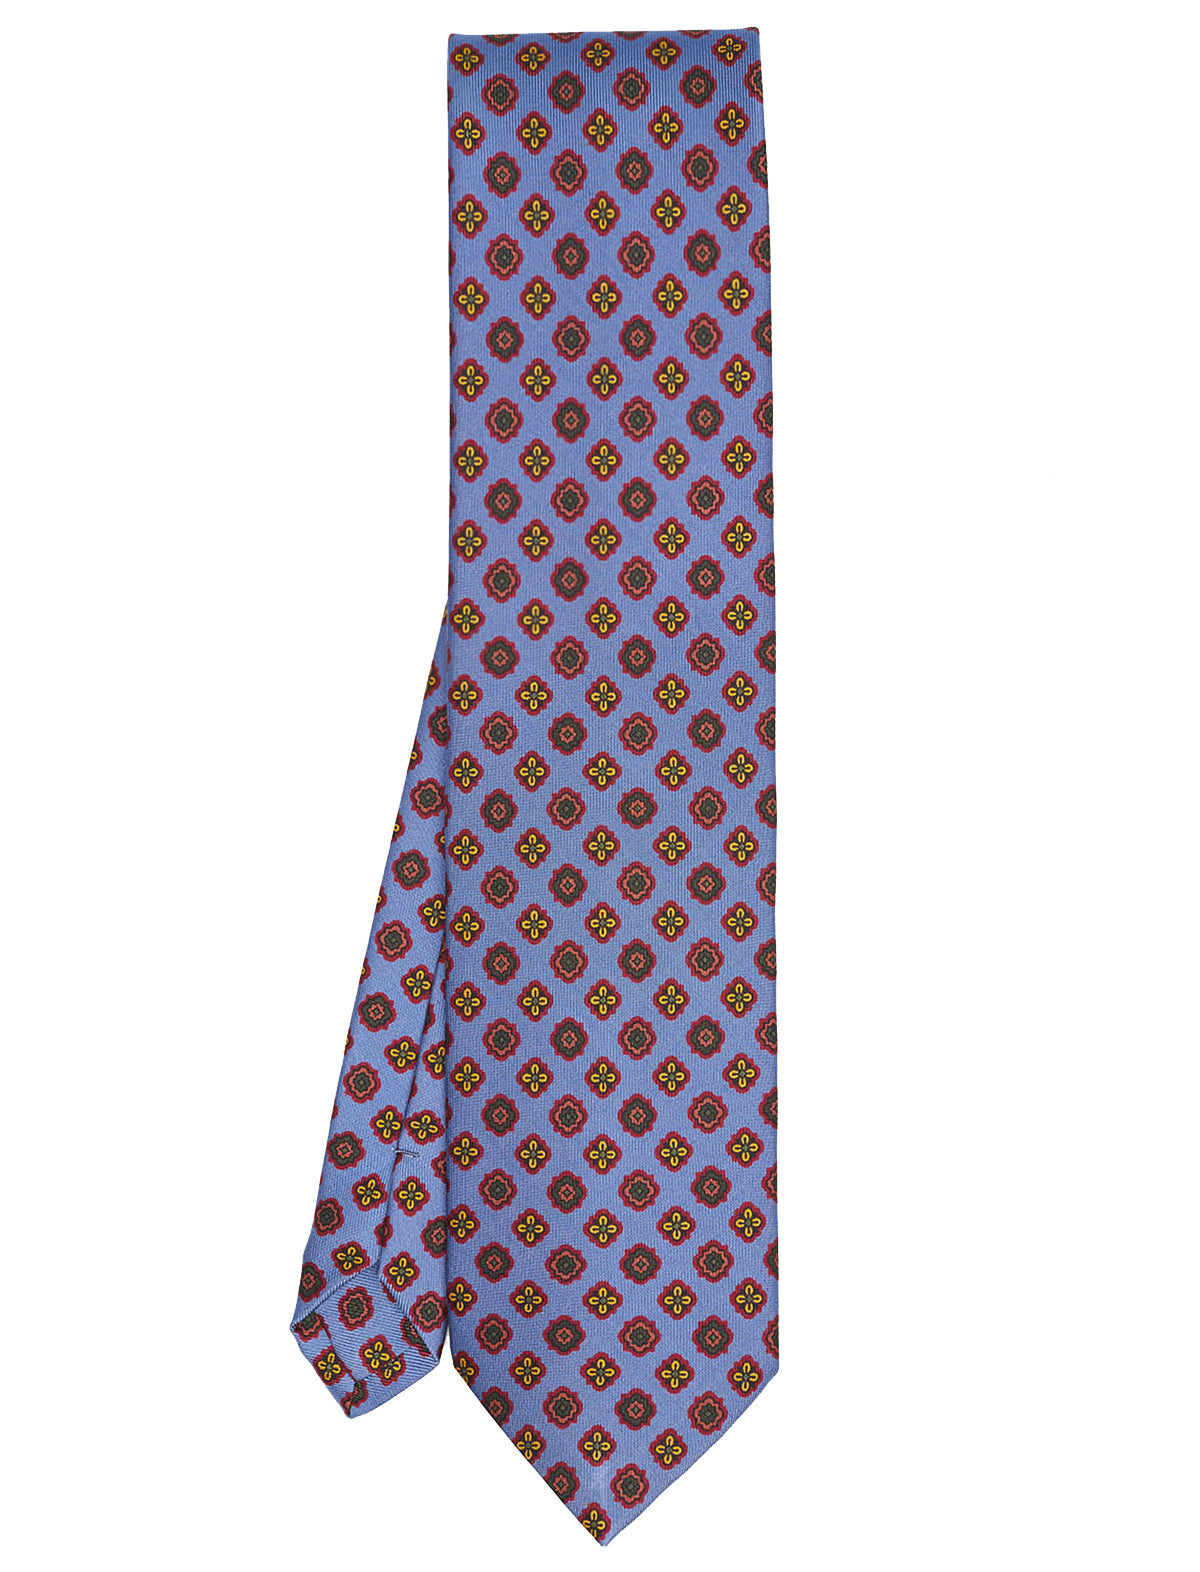 E.Marinella Hand-Printed Silk Tie in Mid-Blue Floral